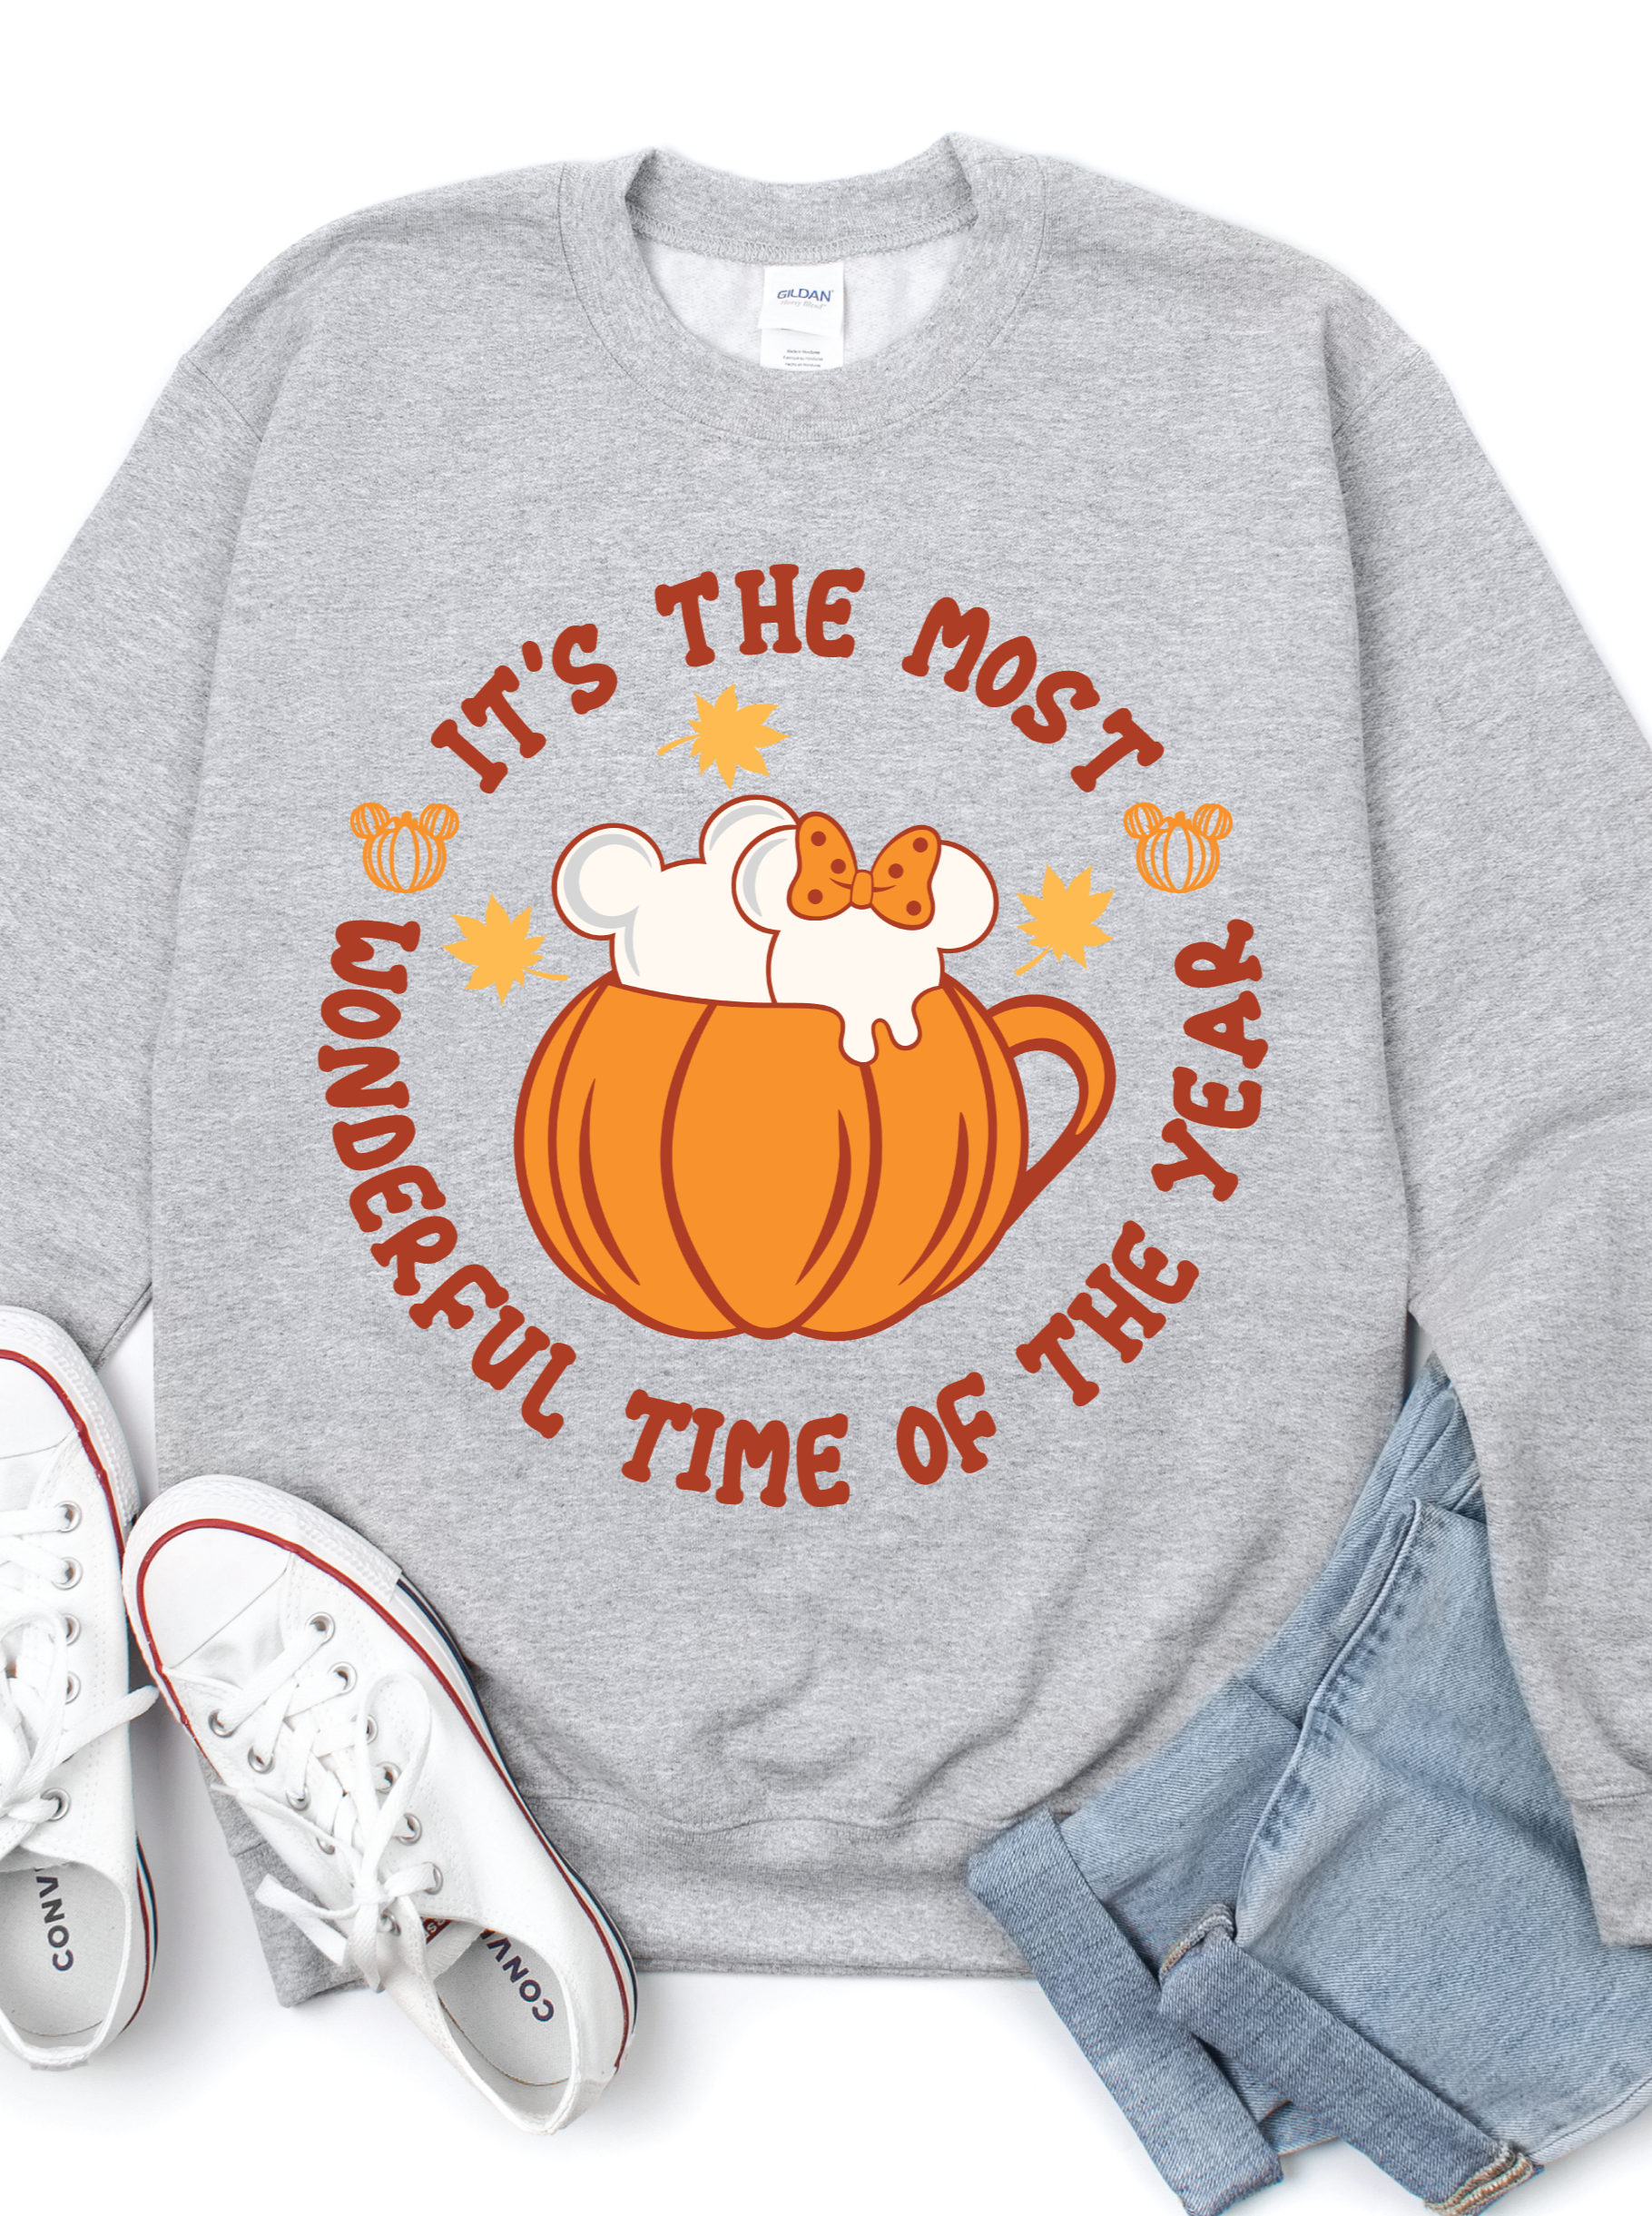 Most Wonderful Time of the Year || Adult Unisex Pullover